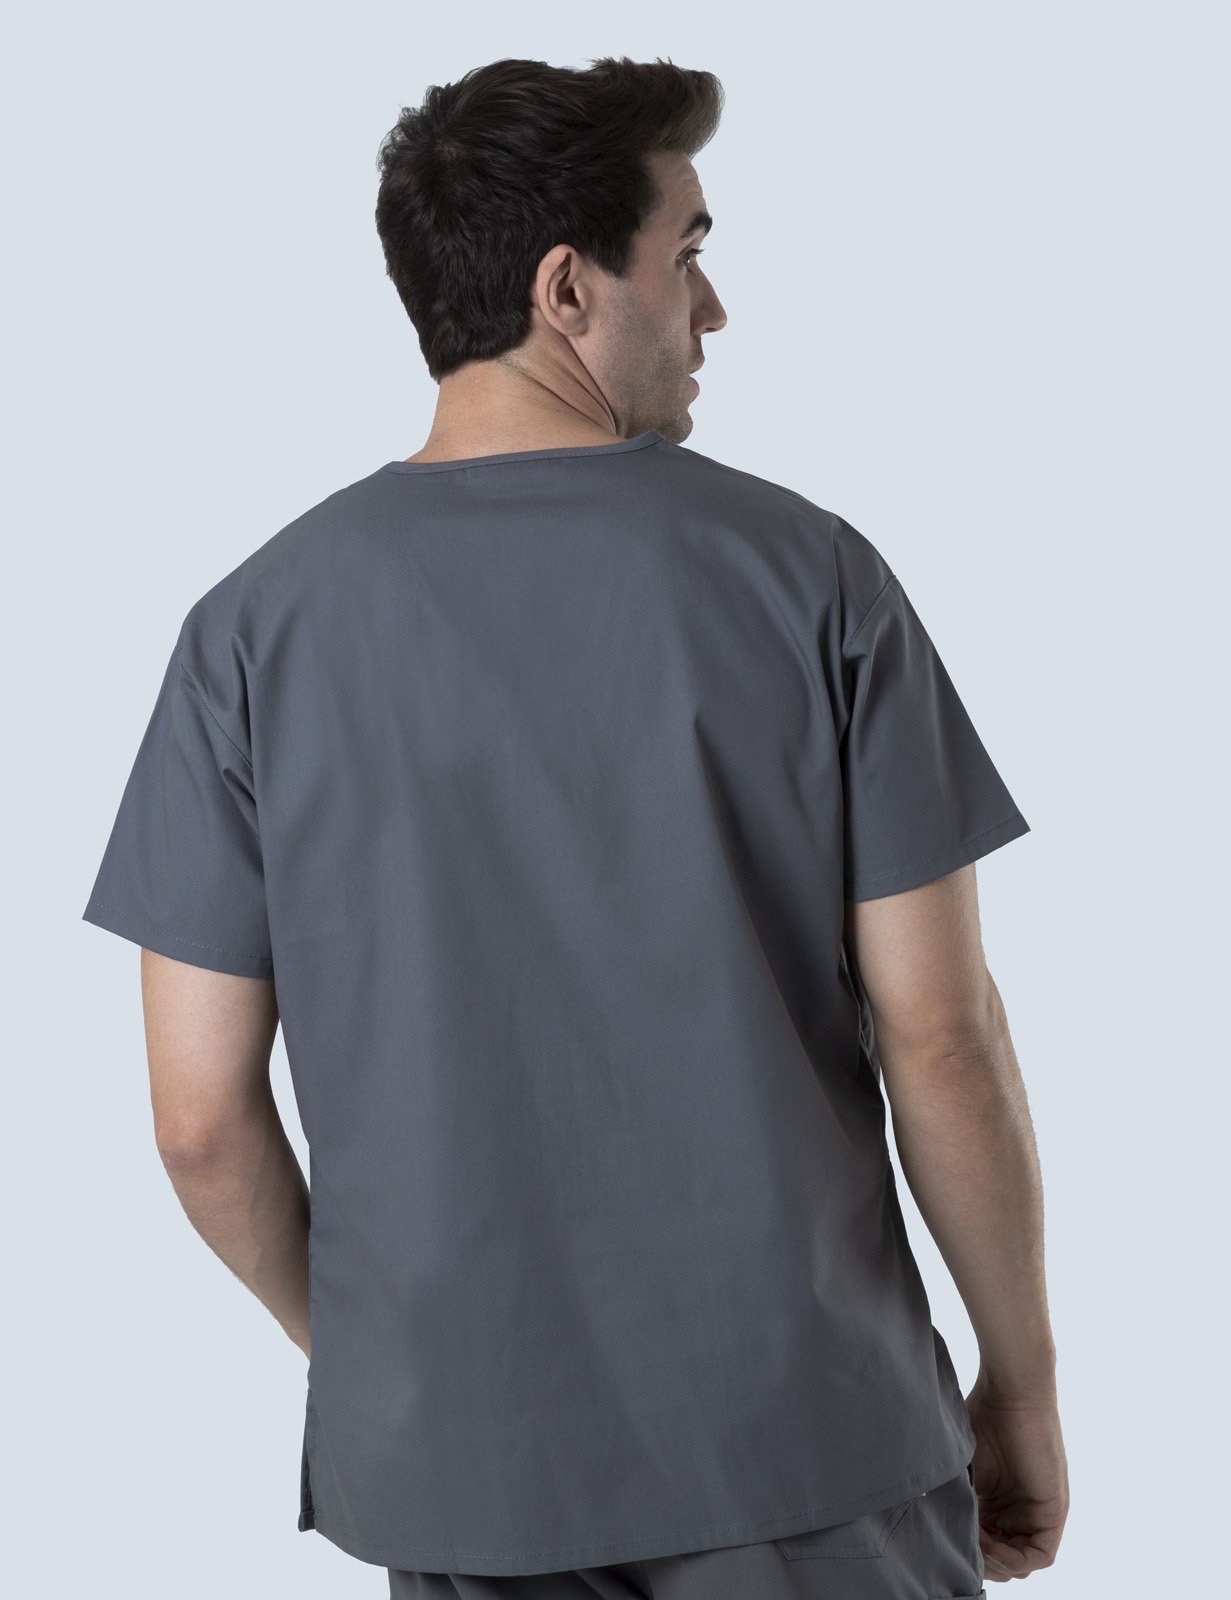 Toowoomba Hospital - Doctor (4 Pocket Scrub Top and Cargo Pants in